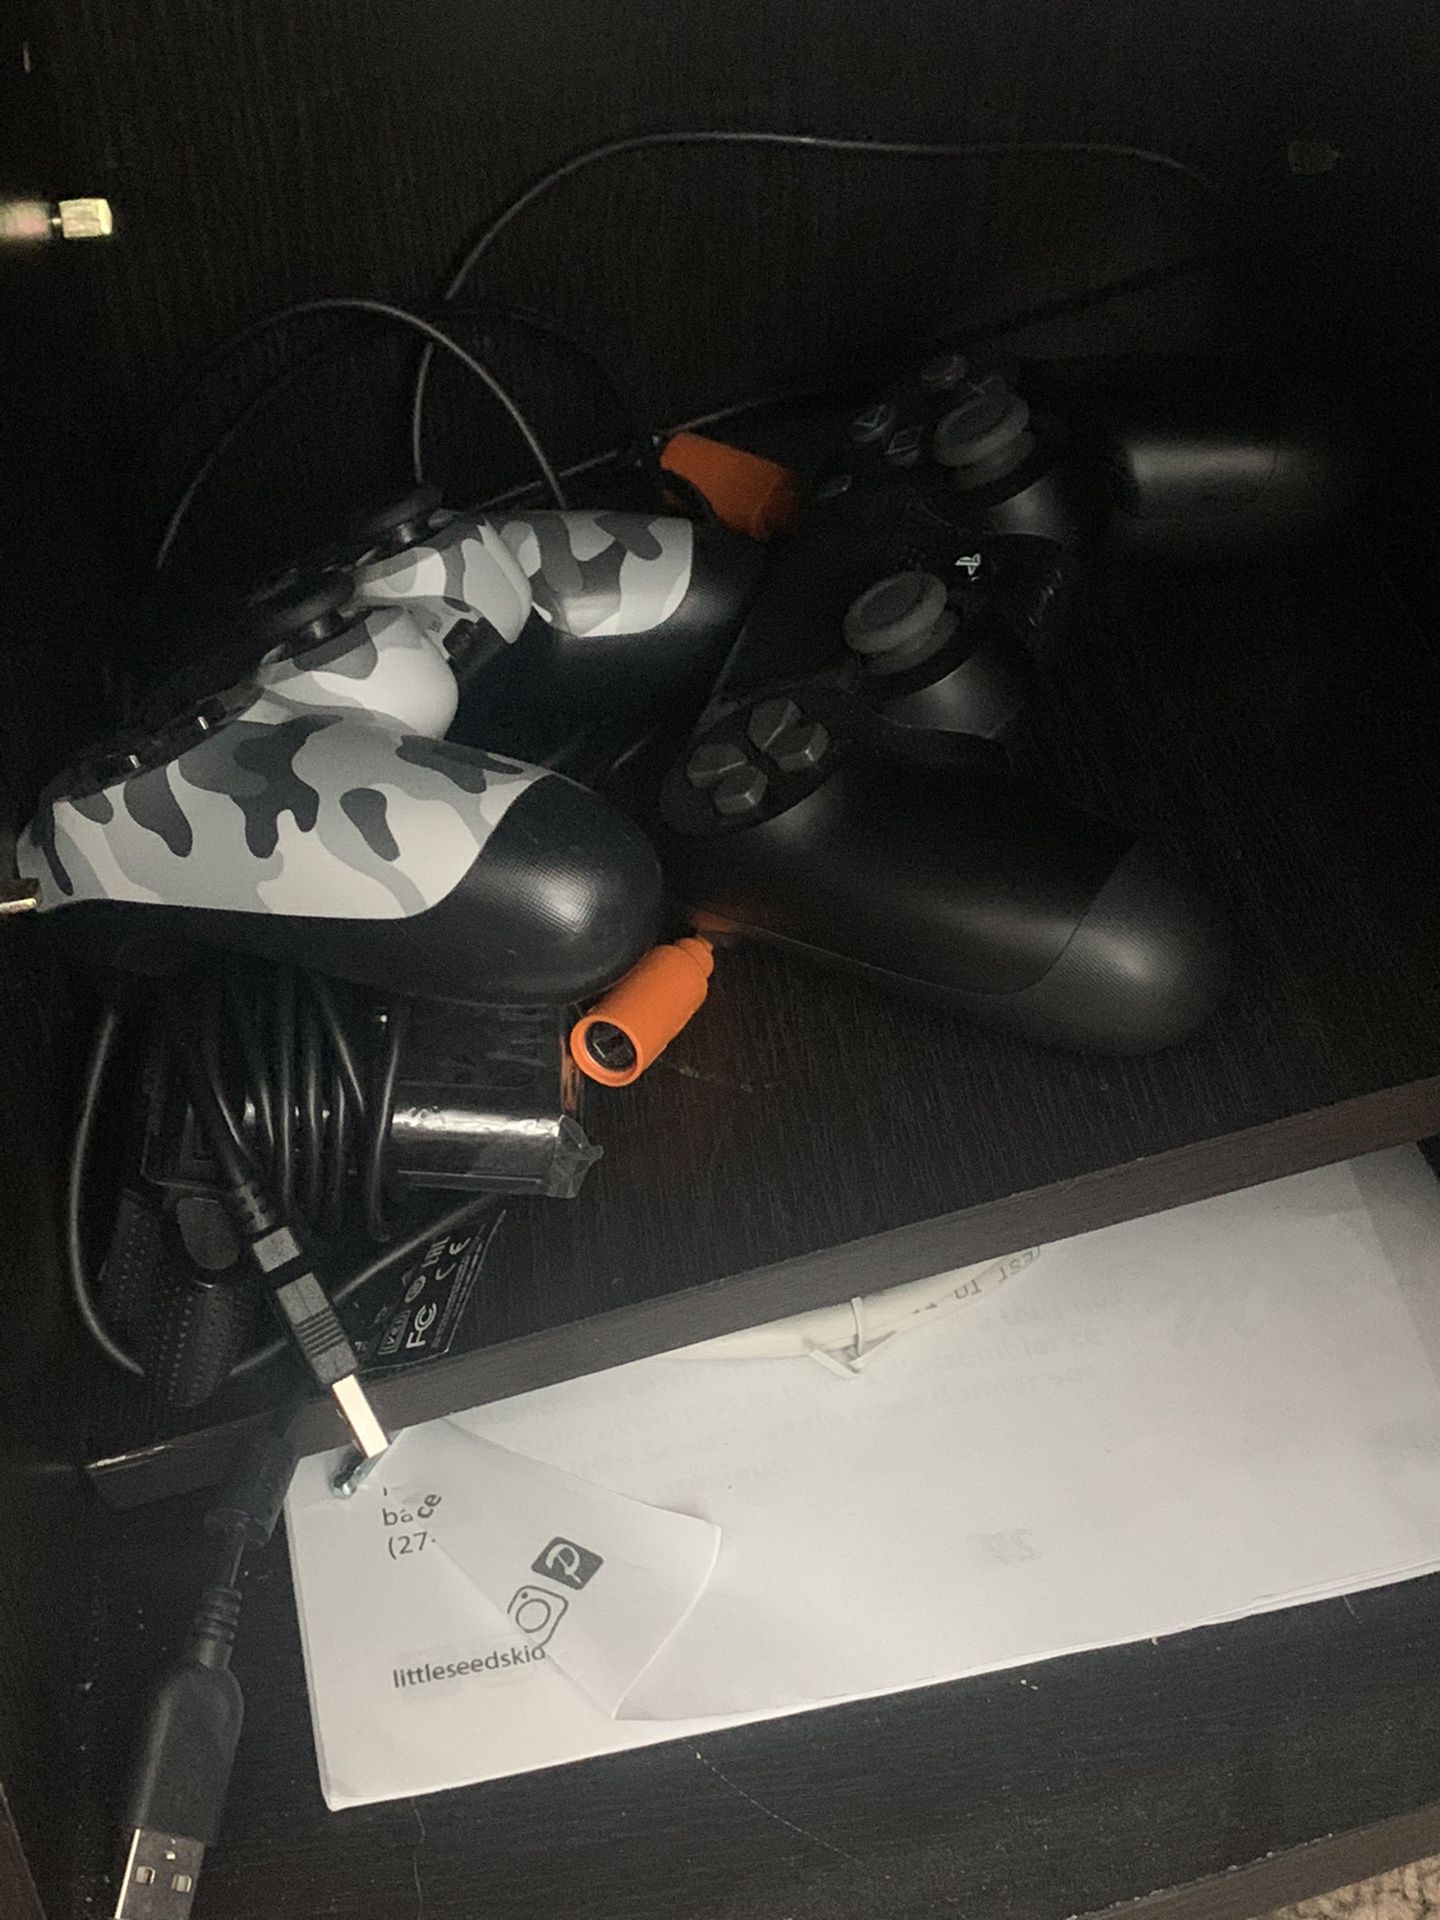 PlayStation 4 with all wires, 2 controllers, and 4 games